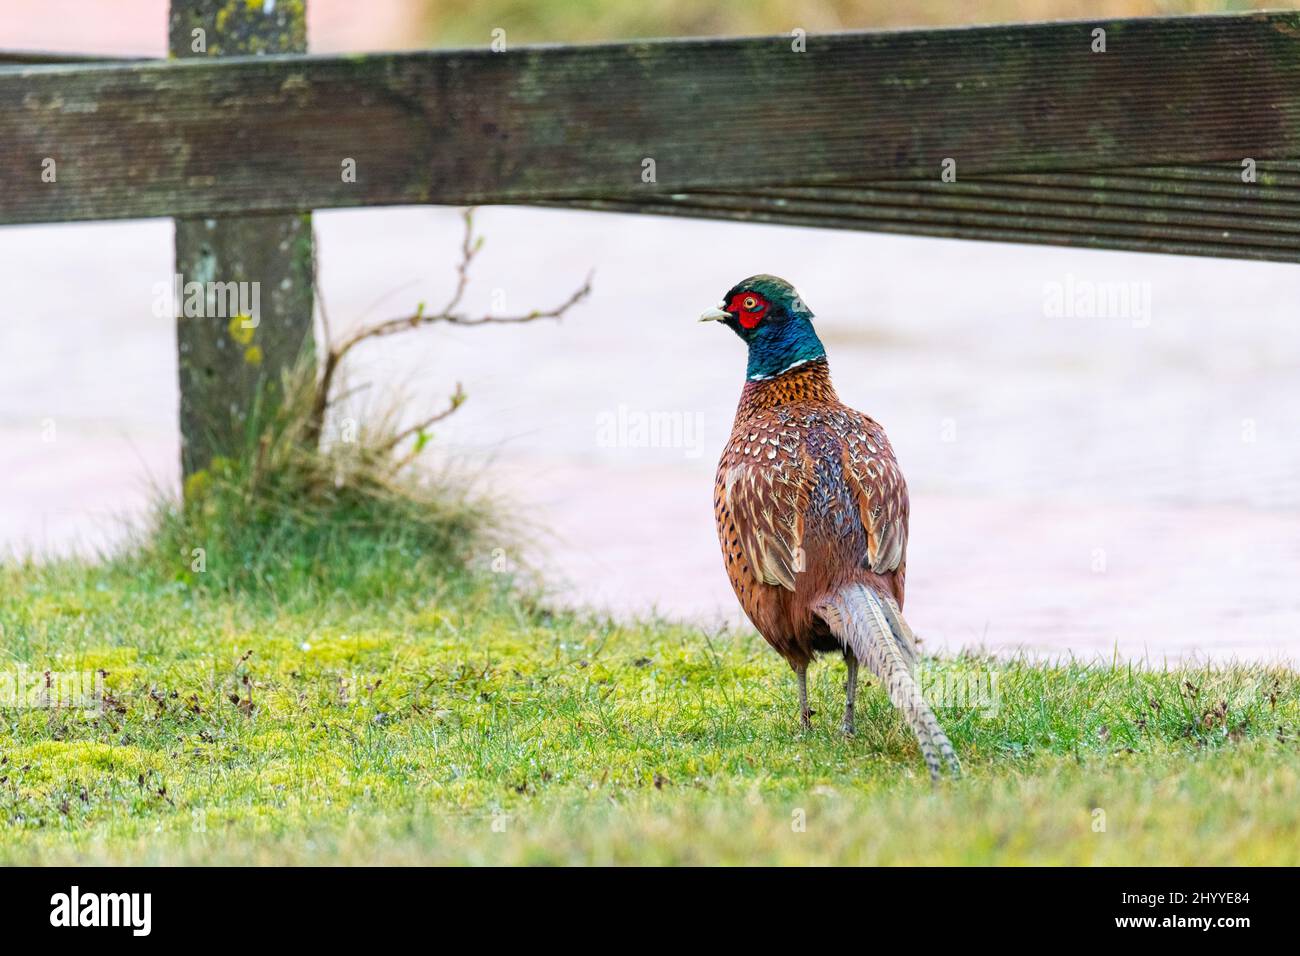 A  pheasant runs through the middle of the town on the island of Juist Stock Photo